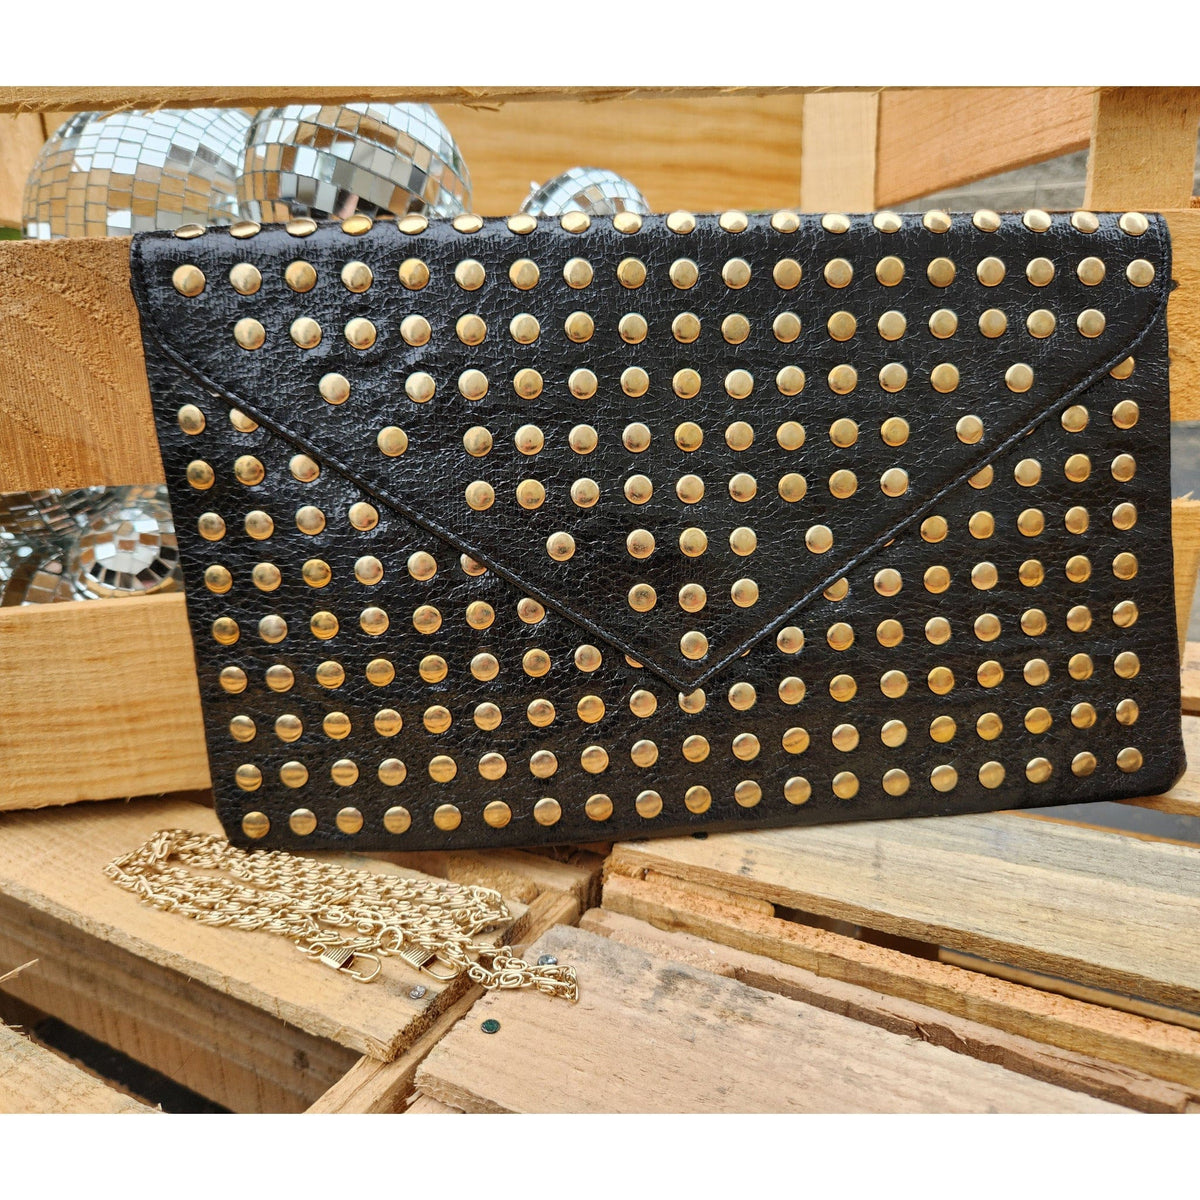 Rock On Studded Clutch With Chain Strap TheFringeCultureCollective